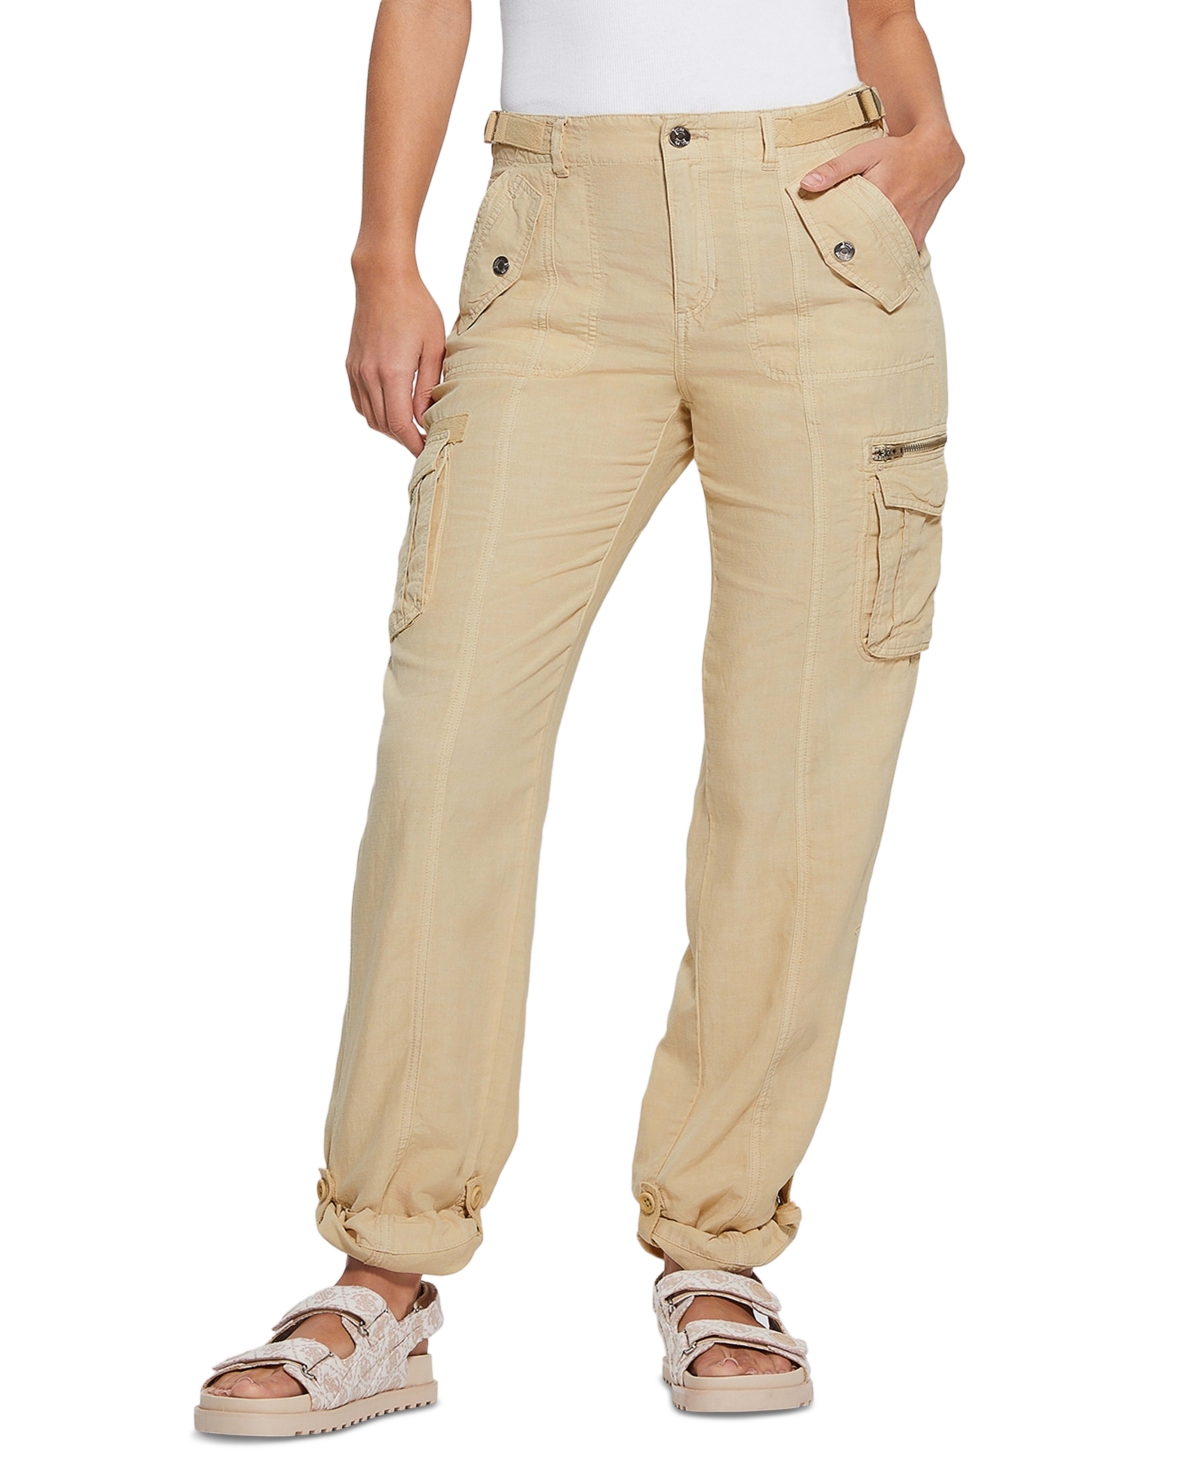 Guess Women's Nessi Cargo Pants In Calm Sands Multi